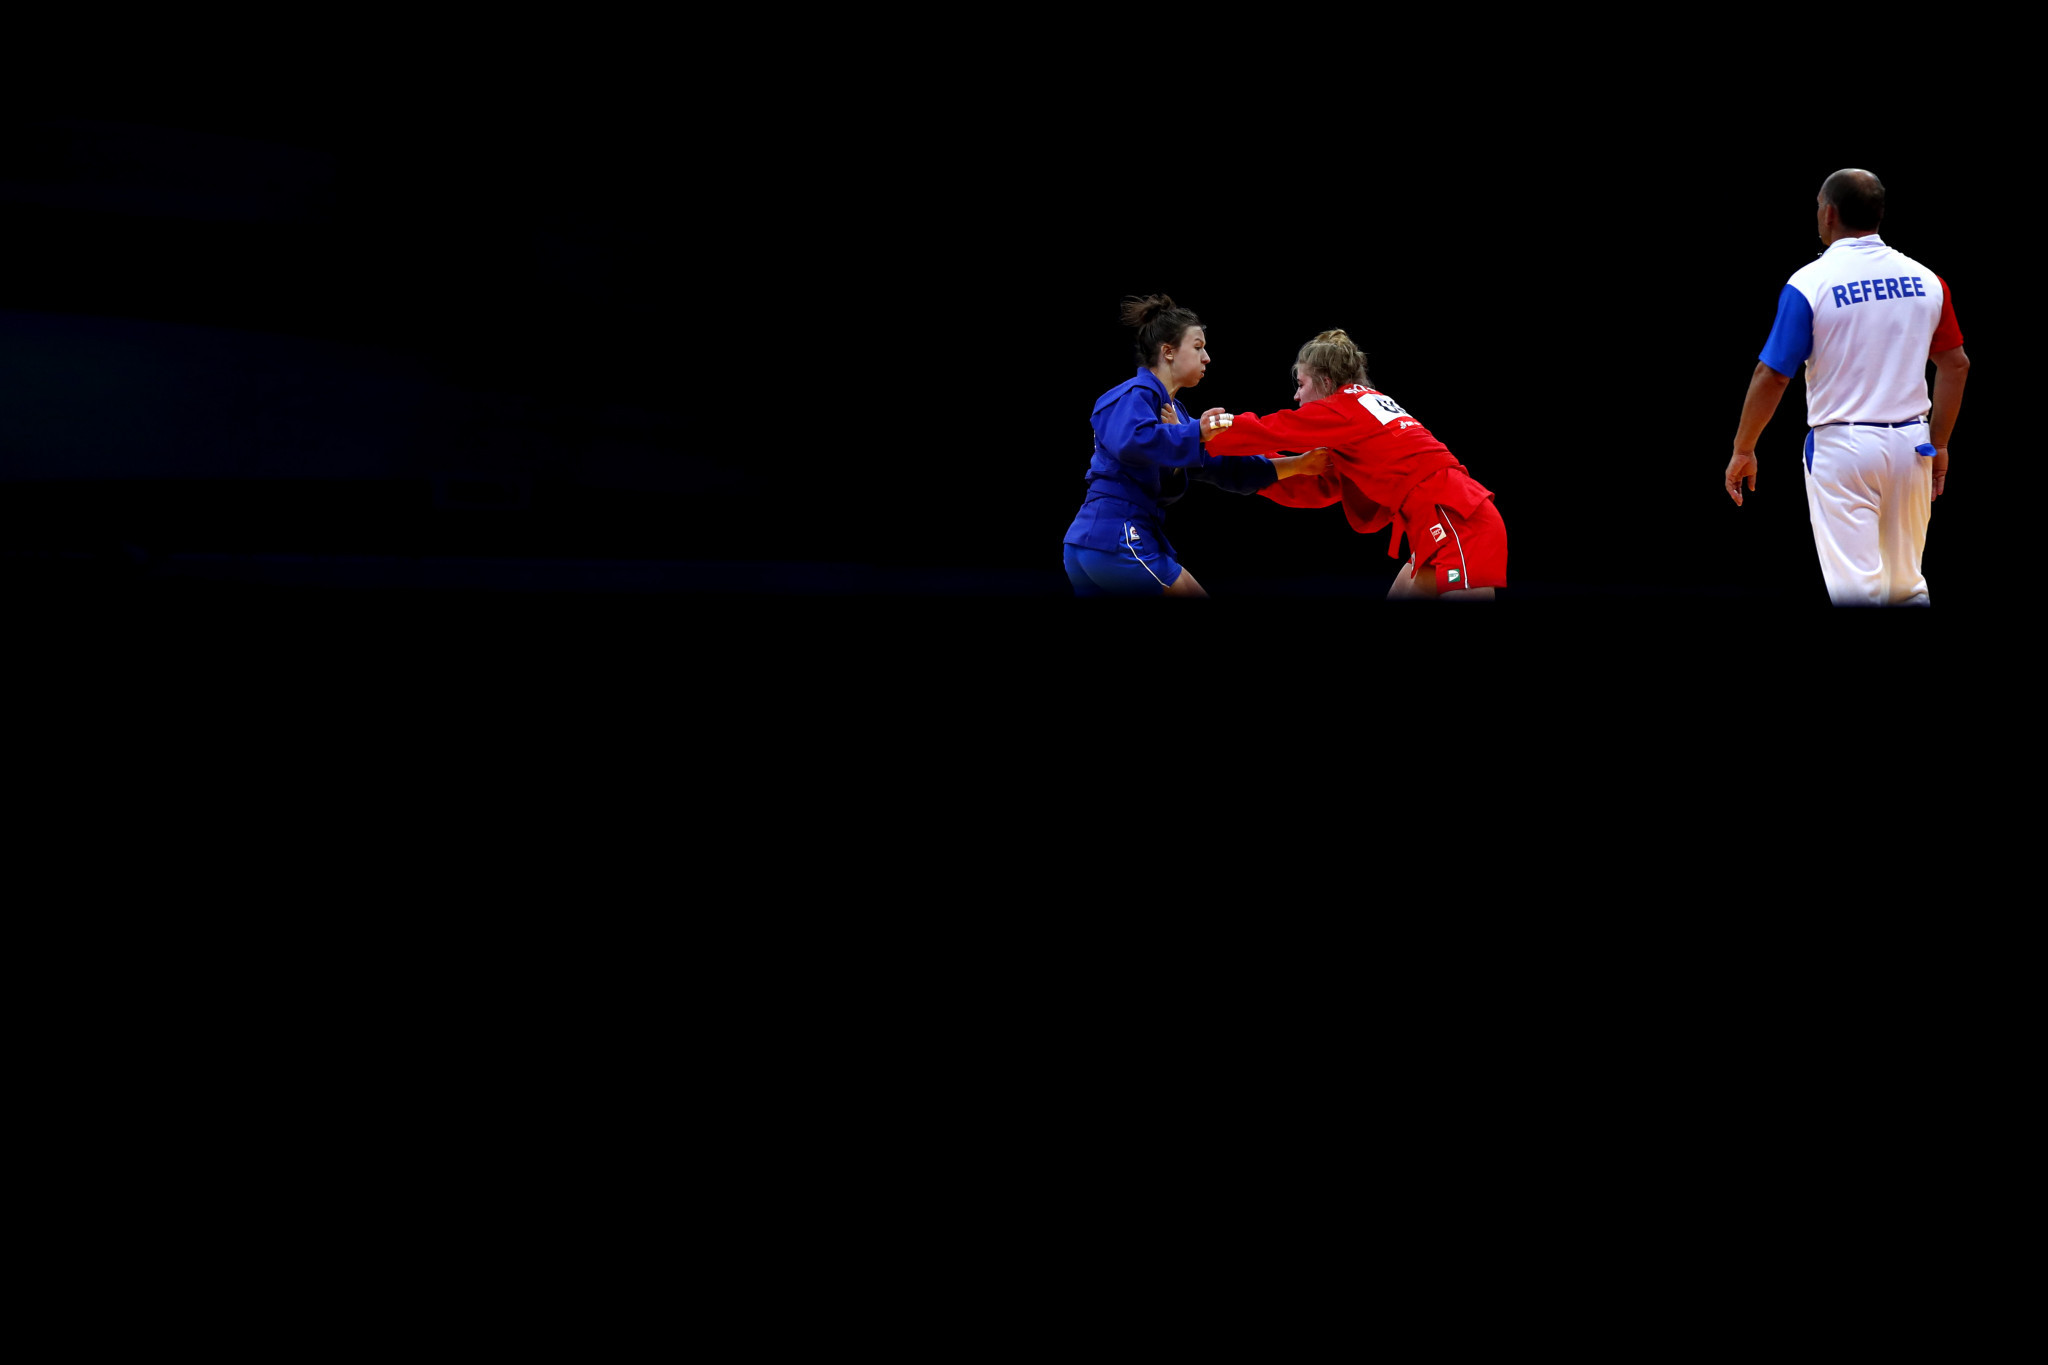 Yekaterinburg was scheduled to stage last year's European Sambo Championships only for it to be cancelled because of the coronavirus pandemic ©Getty Images